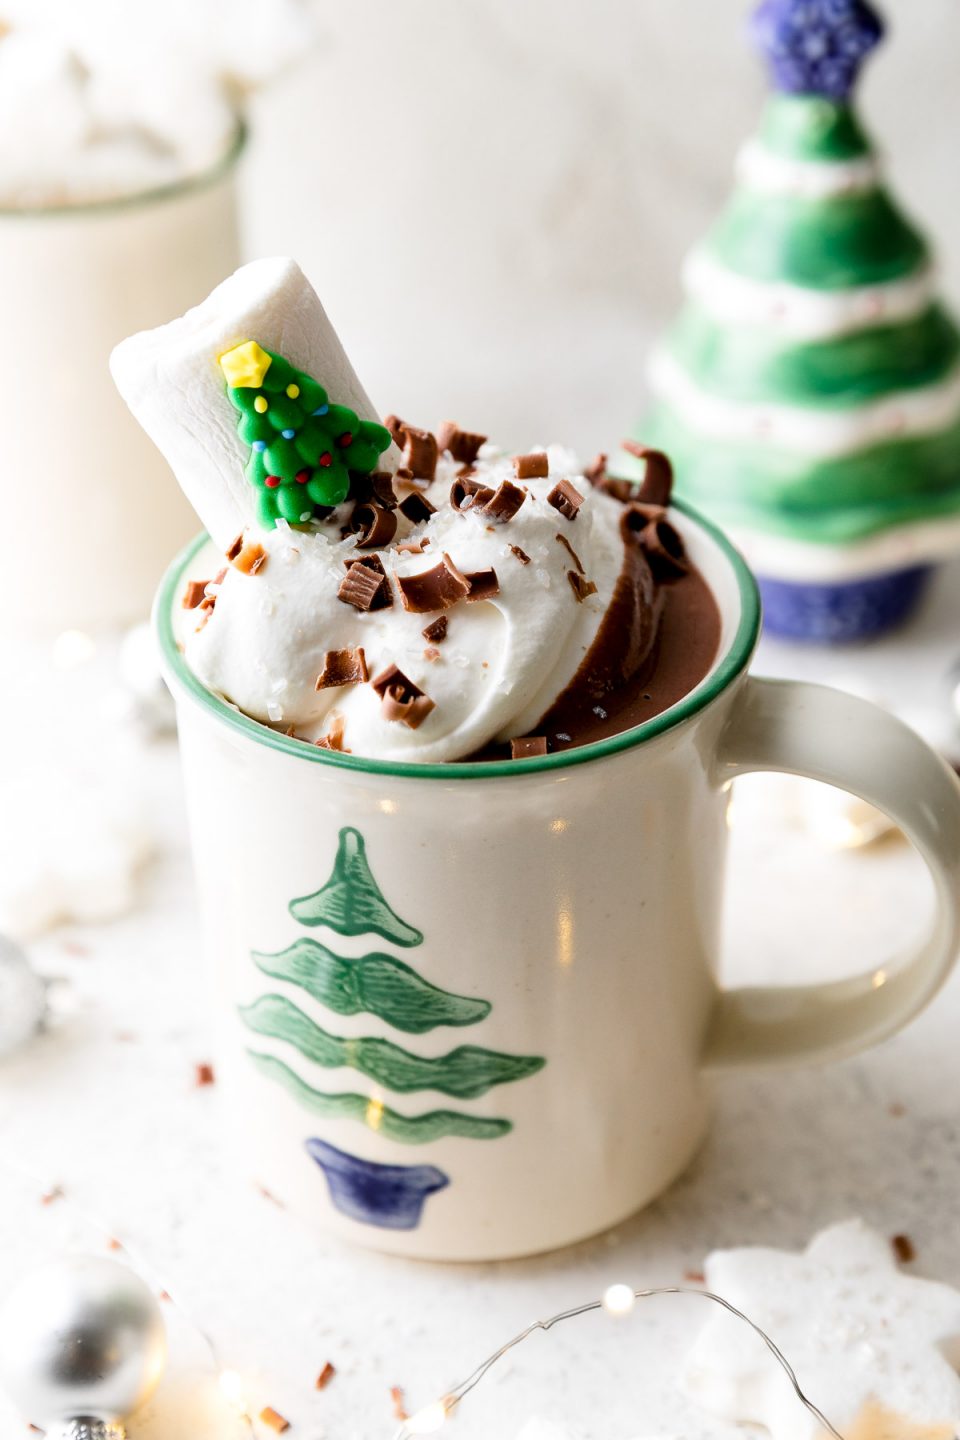 A white mug decorated with a Christmas tree is filled with Christmas Morning Cocoa, topped with whipped cream, & garnished with chocolate shavings & a Christmas tree marshmallow. The mug sits atop a white surface alongside marshmallows, ornaments, & small Christmas decorations.